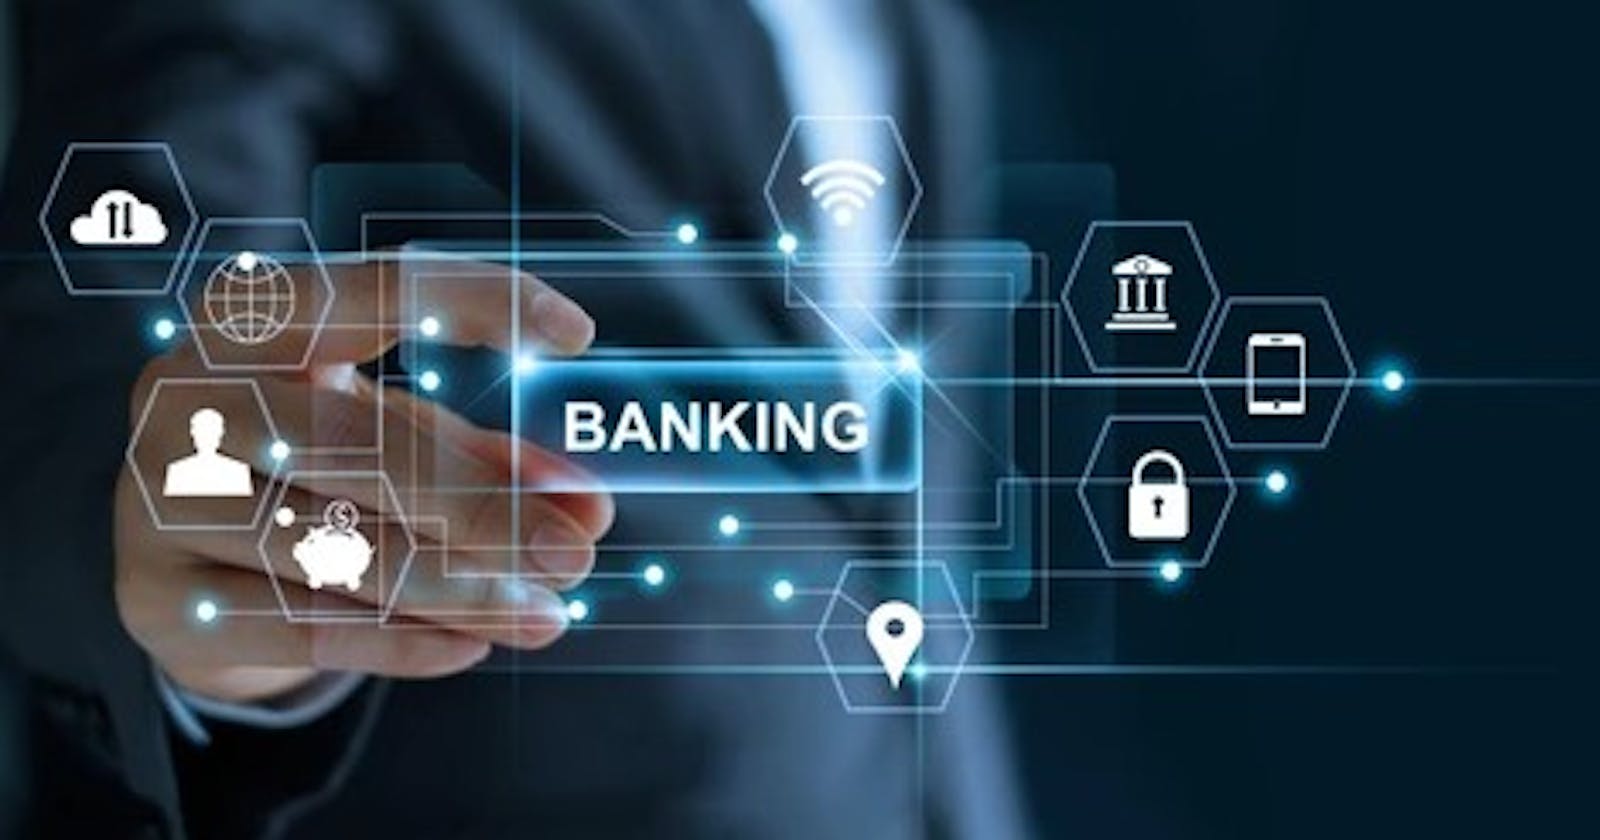 The Power of Object-Oriented Programming in Java for Banking Applications